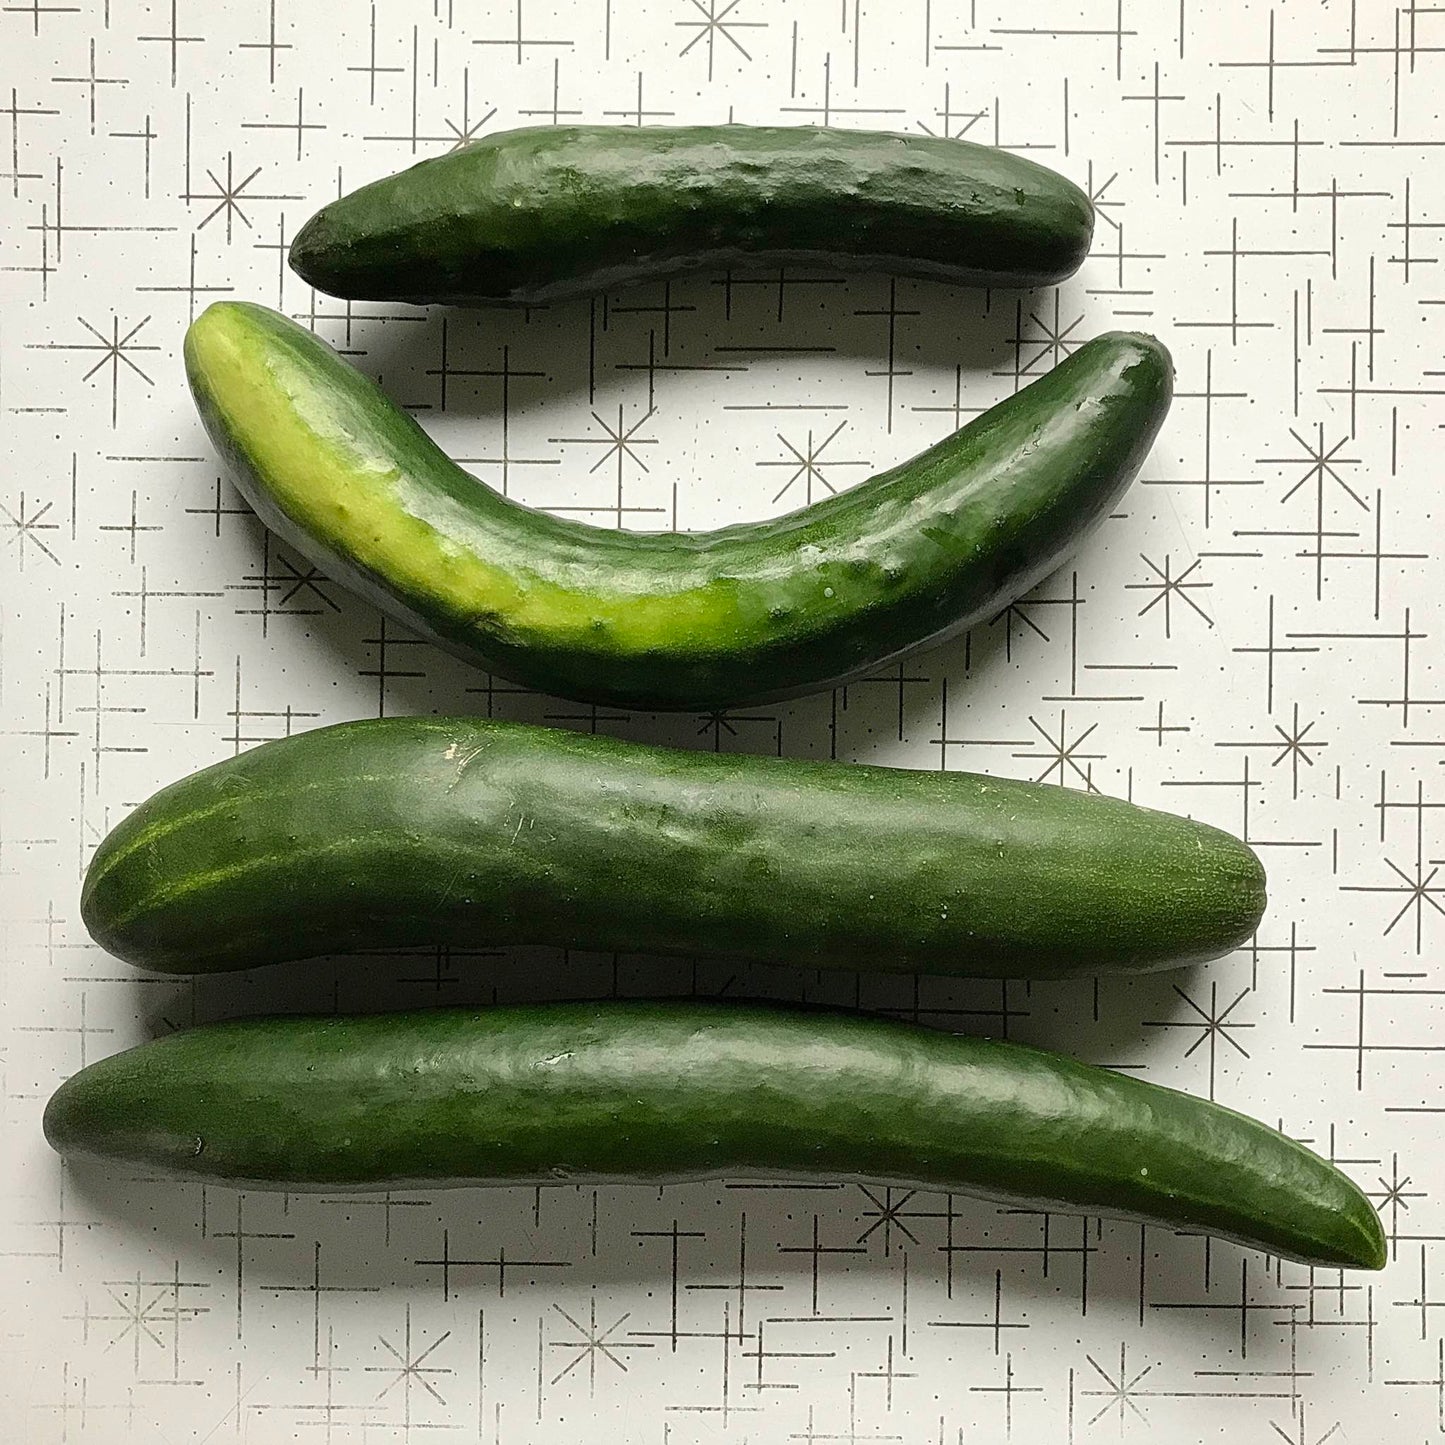 Four slicer cucumbers on a table.